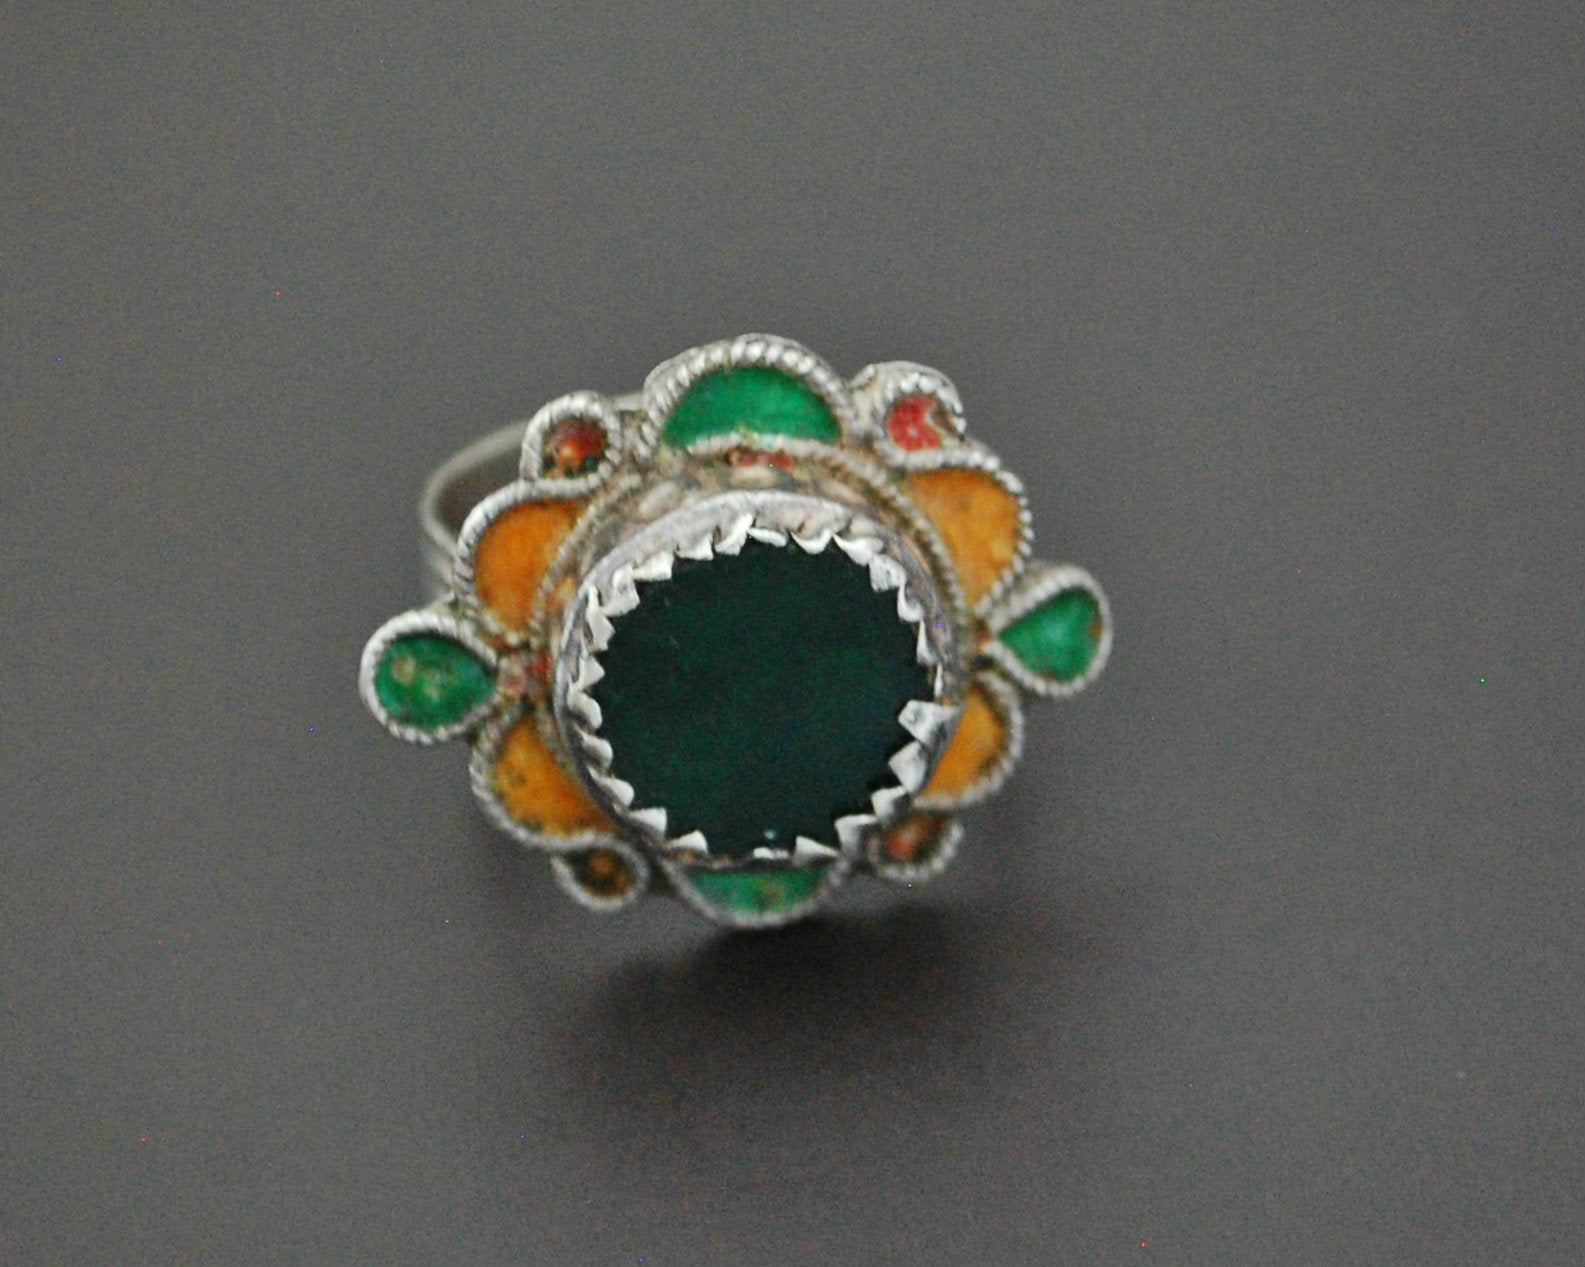 Berber Enamel Ring with Green Stone - Size 9